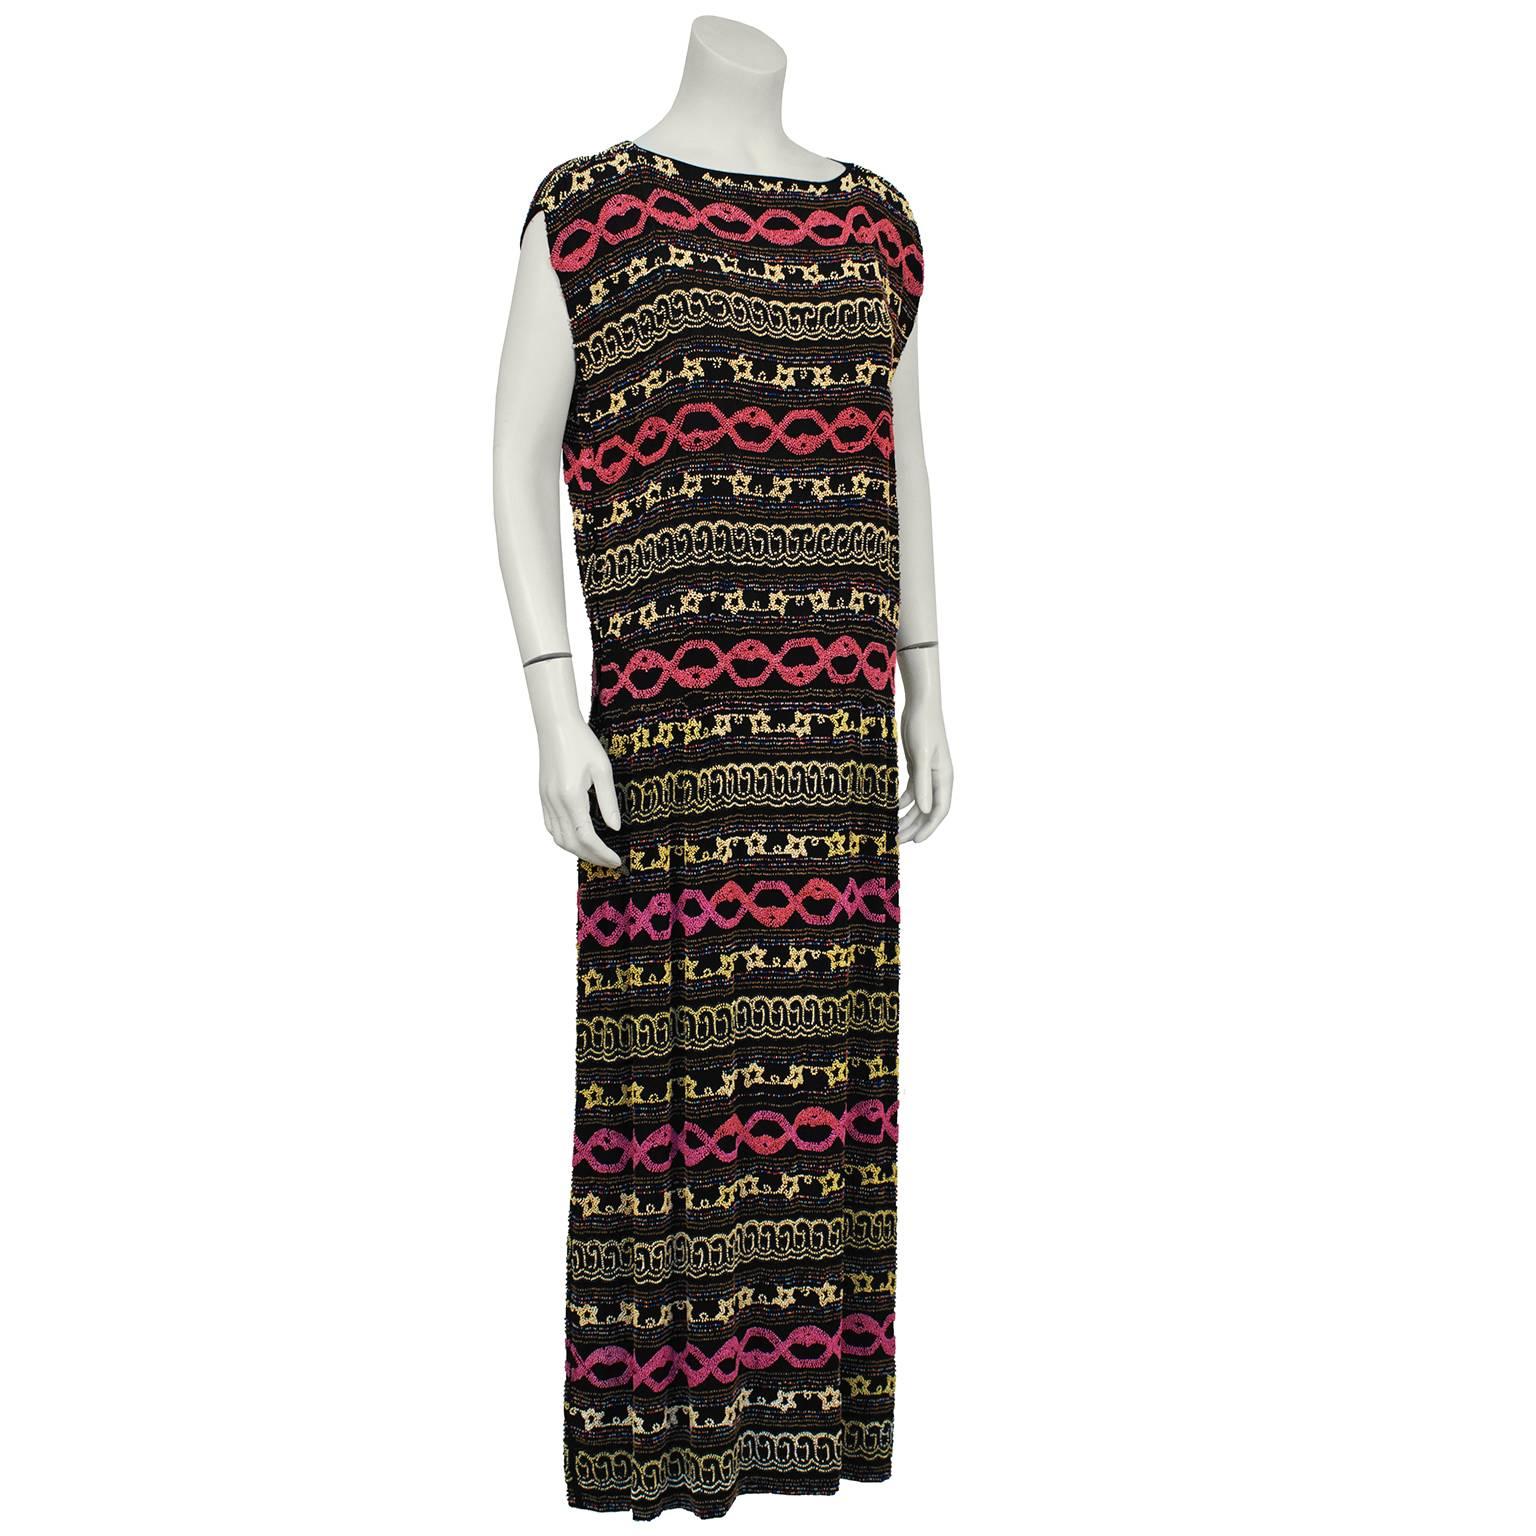 Unusual 1920's Art Deco black silk crepe and pastel beaded flapper style beaded sheath dress with sewn in label from Adair, Paris, 4 Cite Paradis. They specialized in beaded dresses that were exported to the US, UK and Canada. Slight cap sleeve,